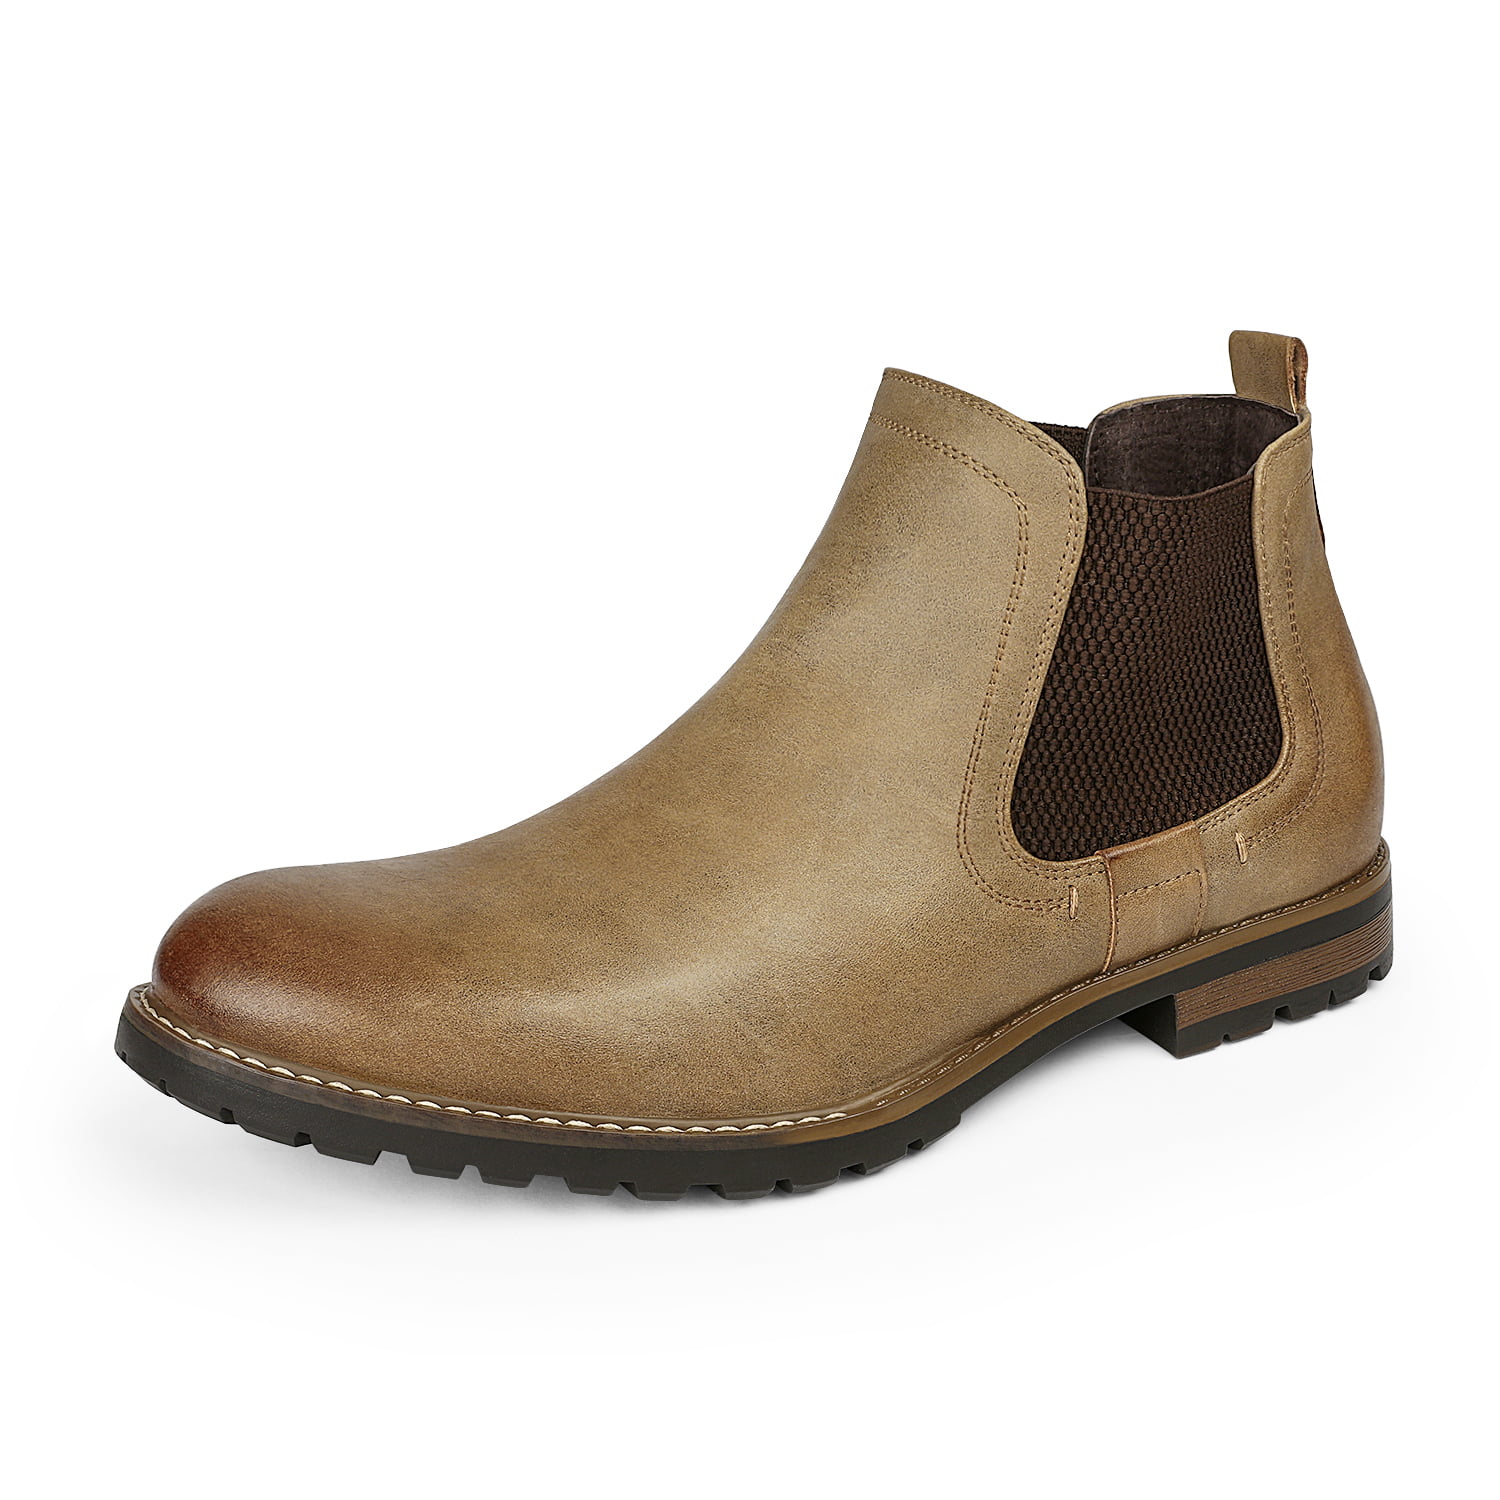 Hogan Ankle Boots in Khaki for Men Brown Mens Shoes Boots Casual boots 